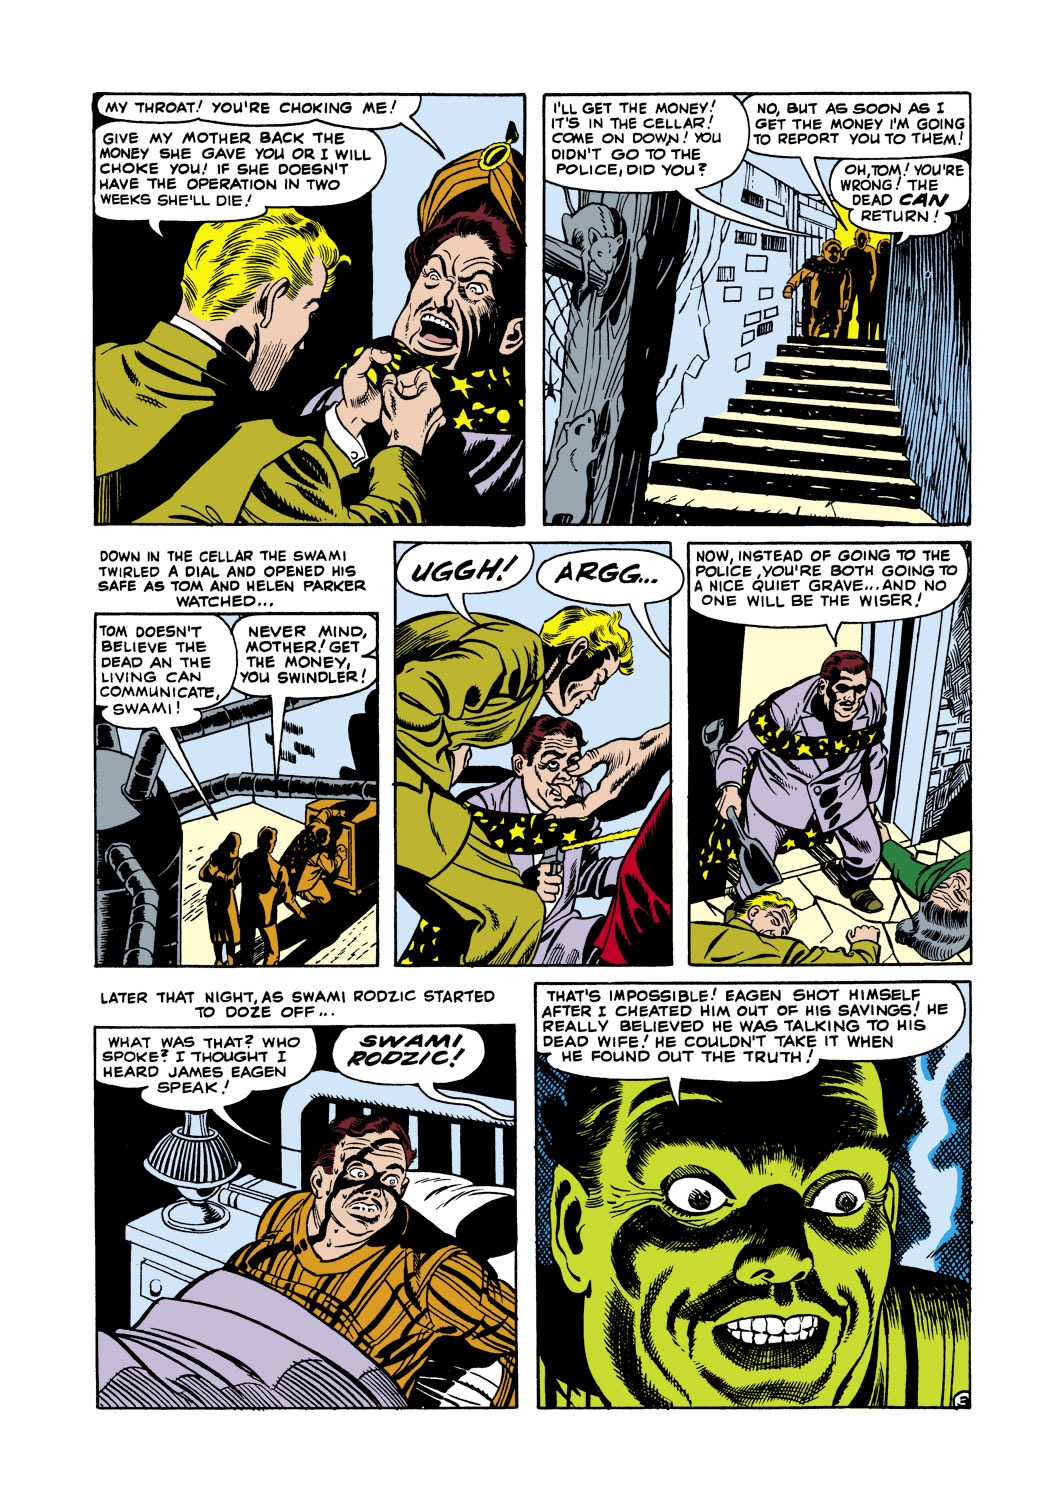 Journey Into Mystery (1952) 13 Page 15